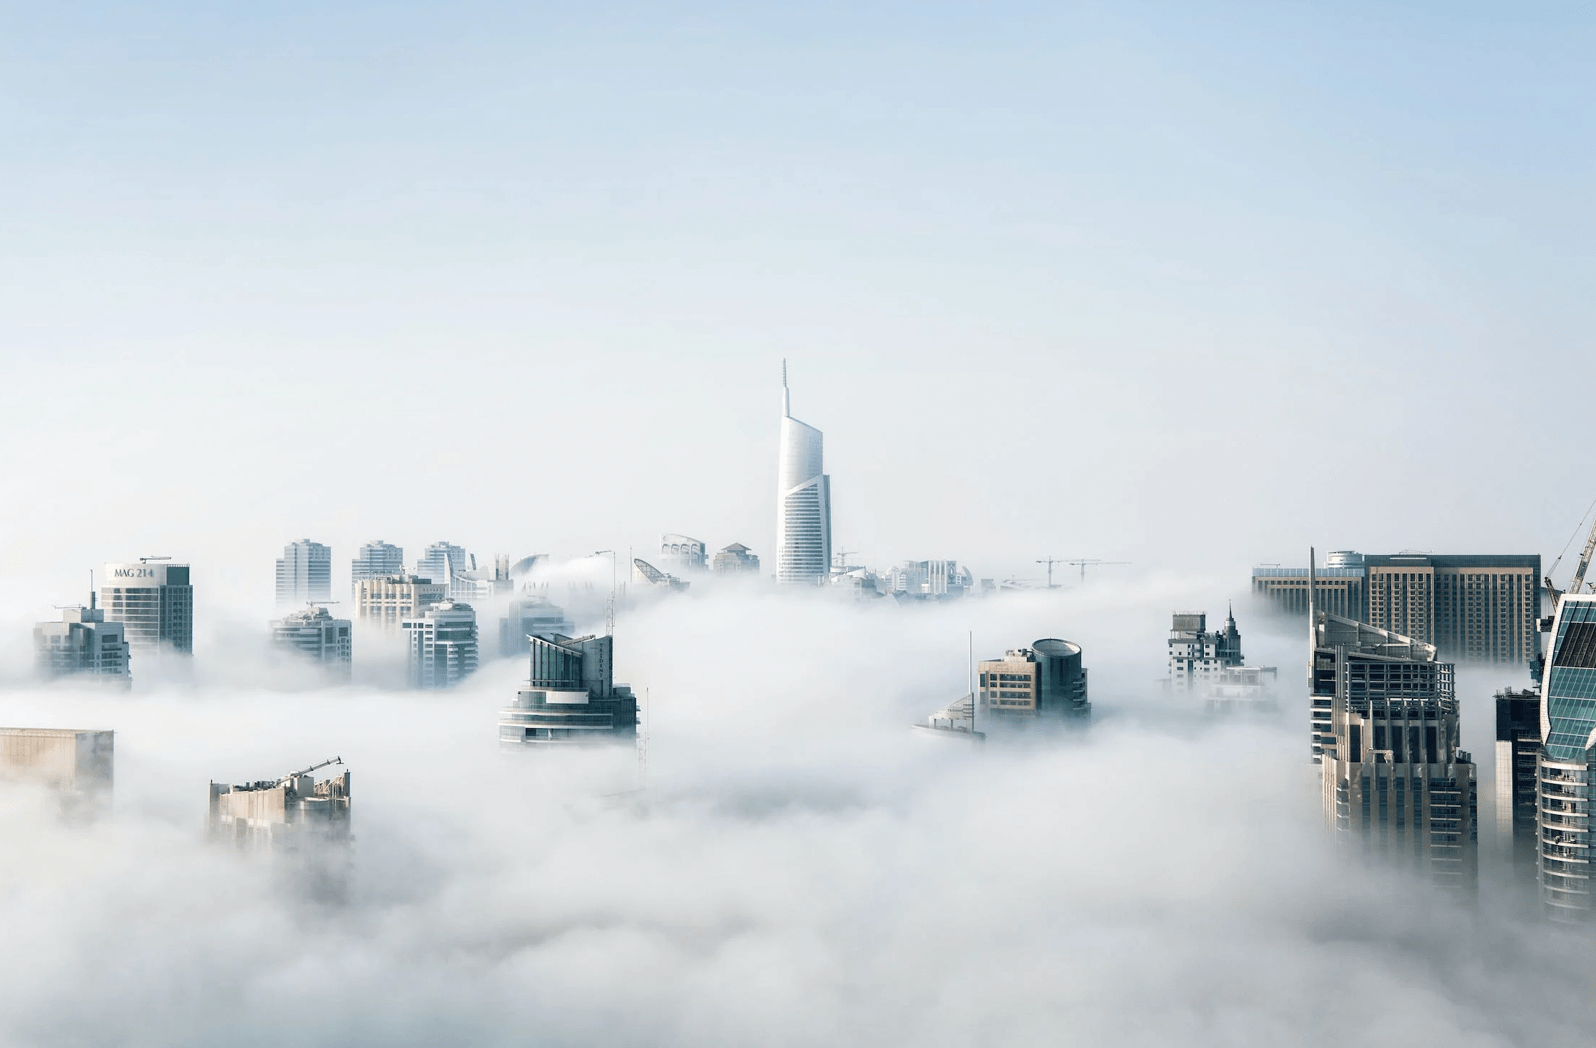 Could data storage. Photos of a city in the clouds.